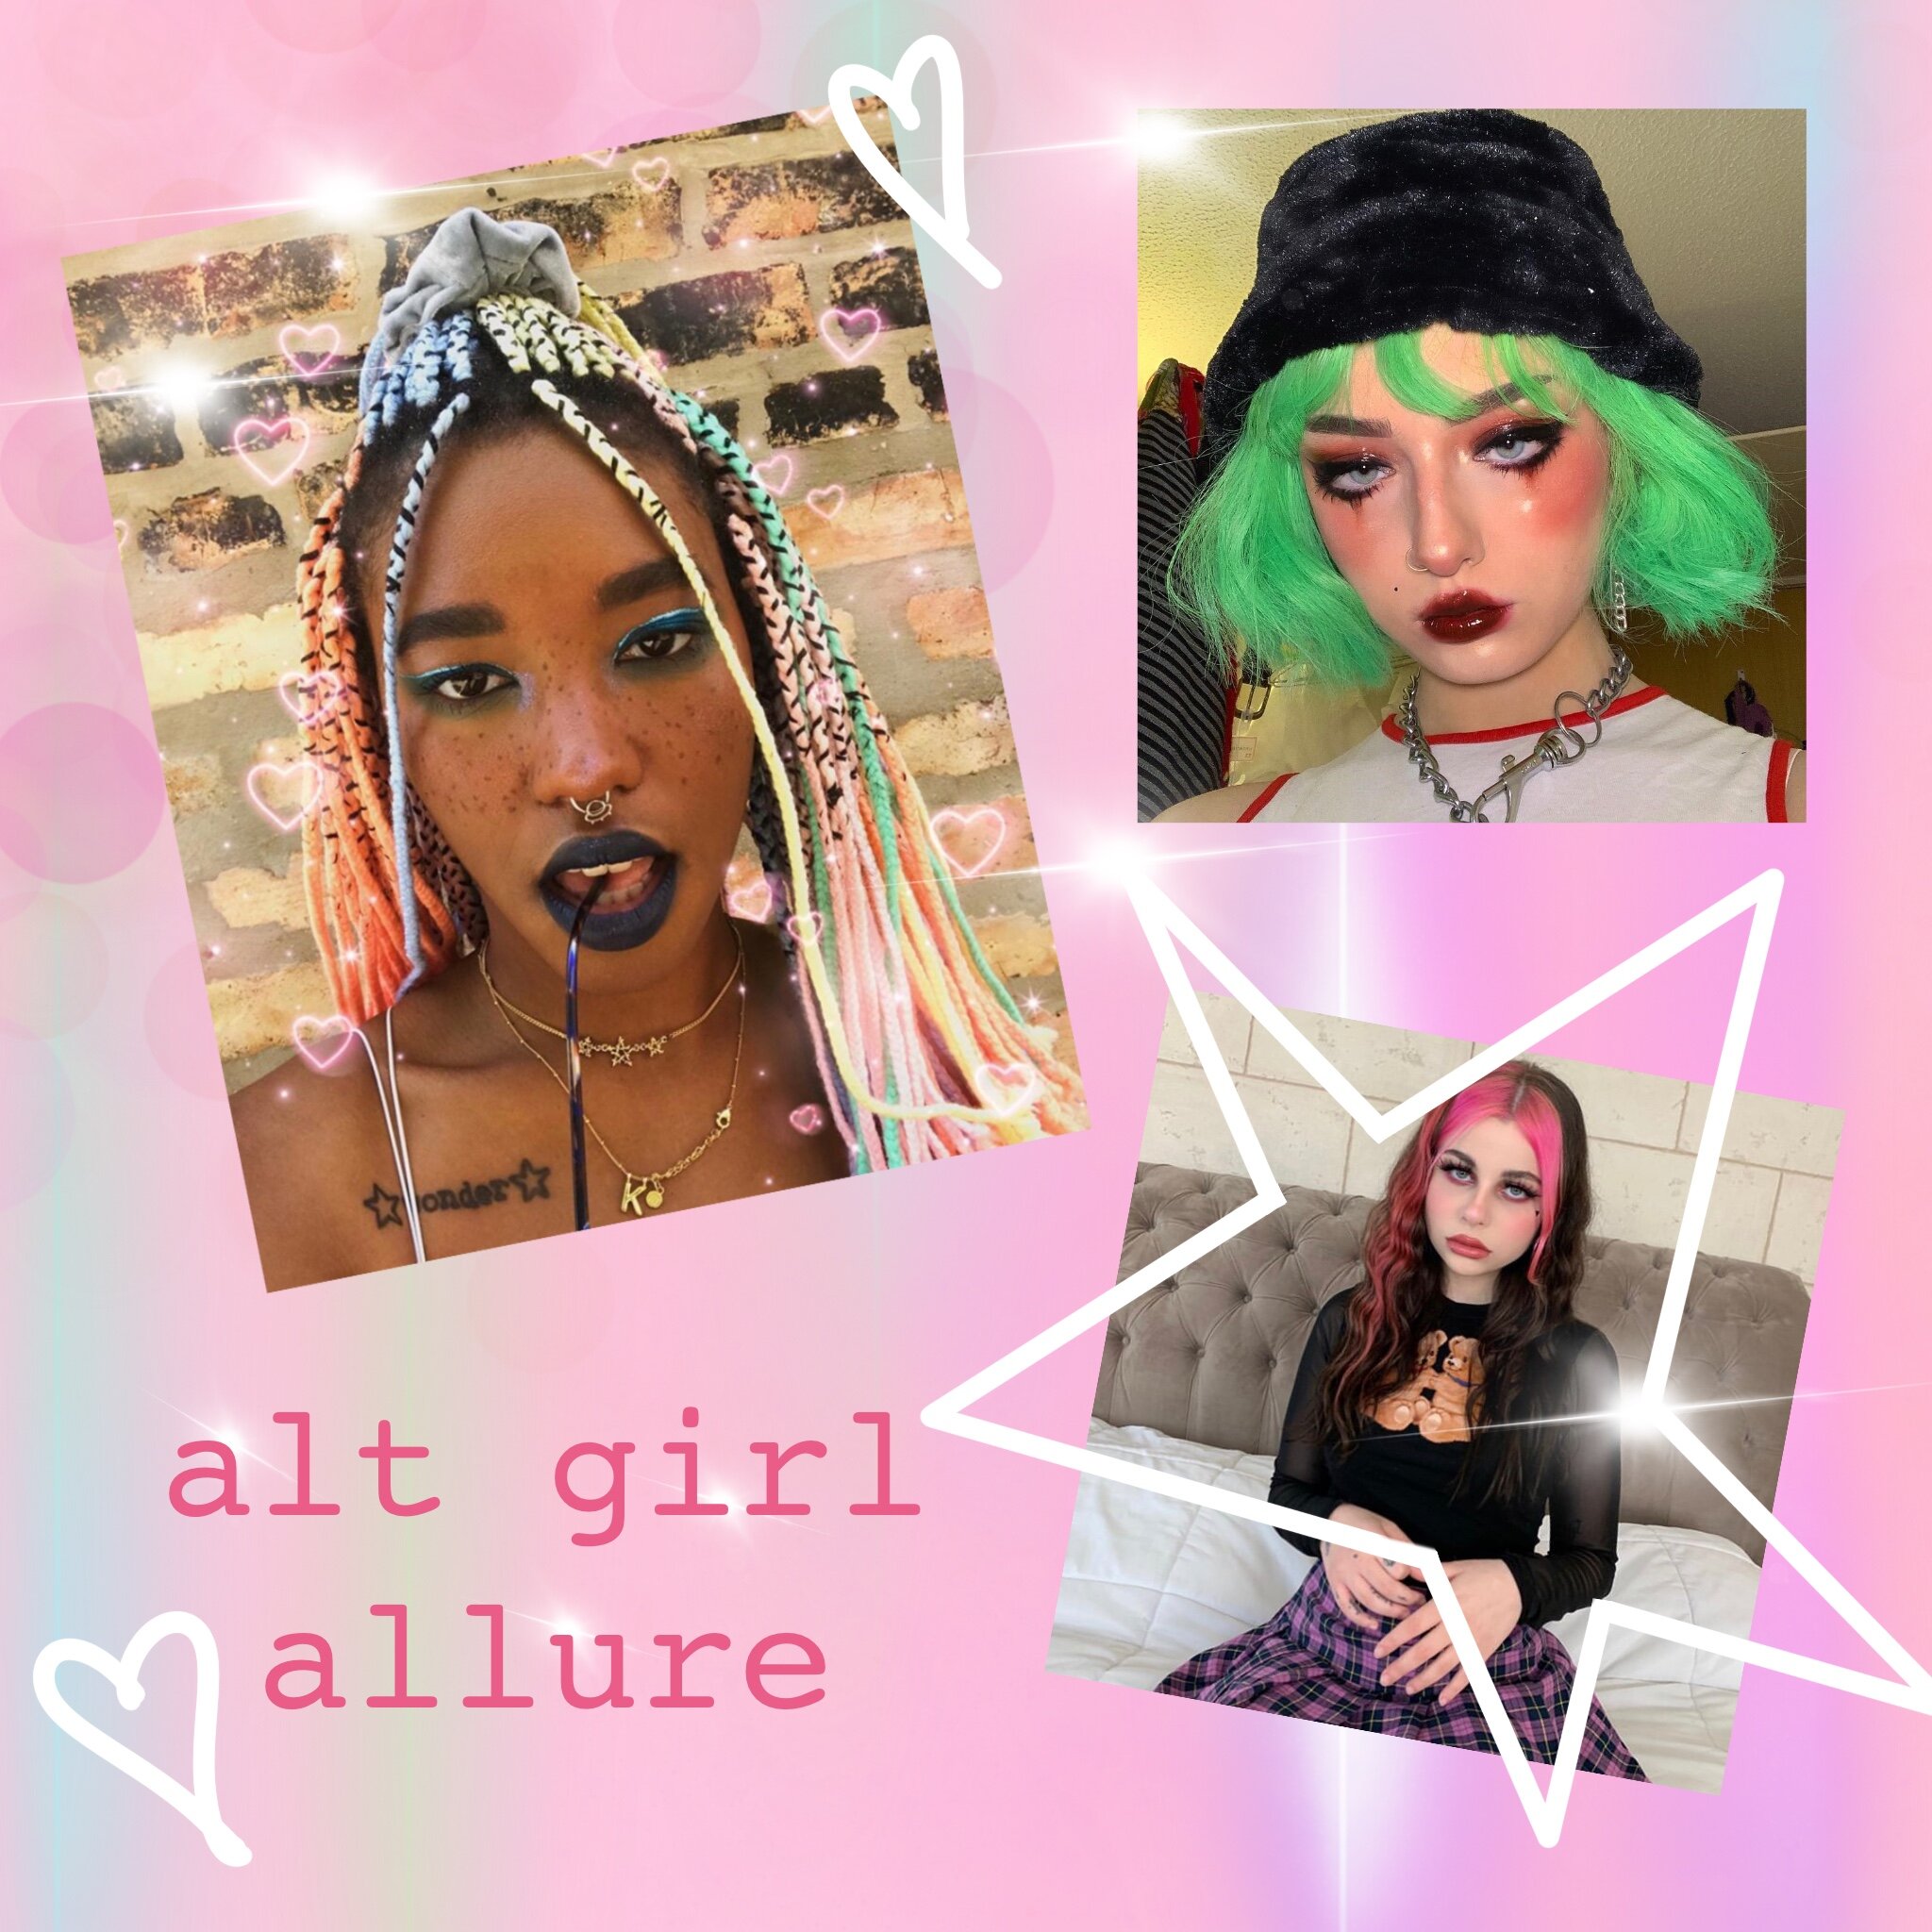 How to be alternative girl